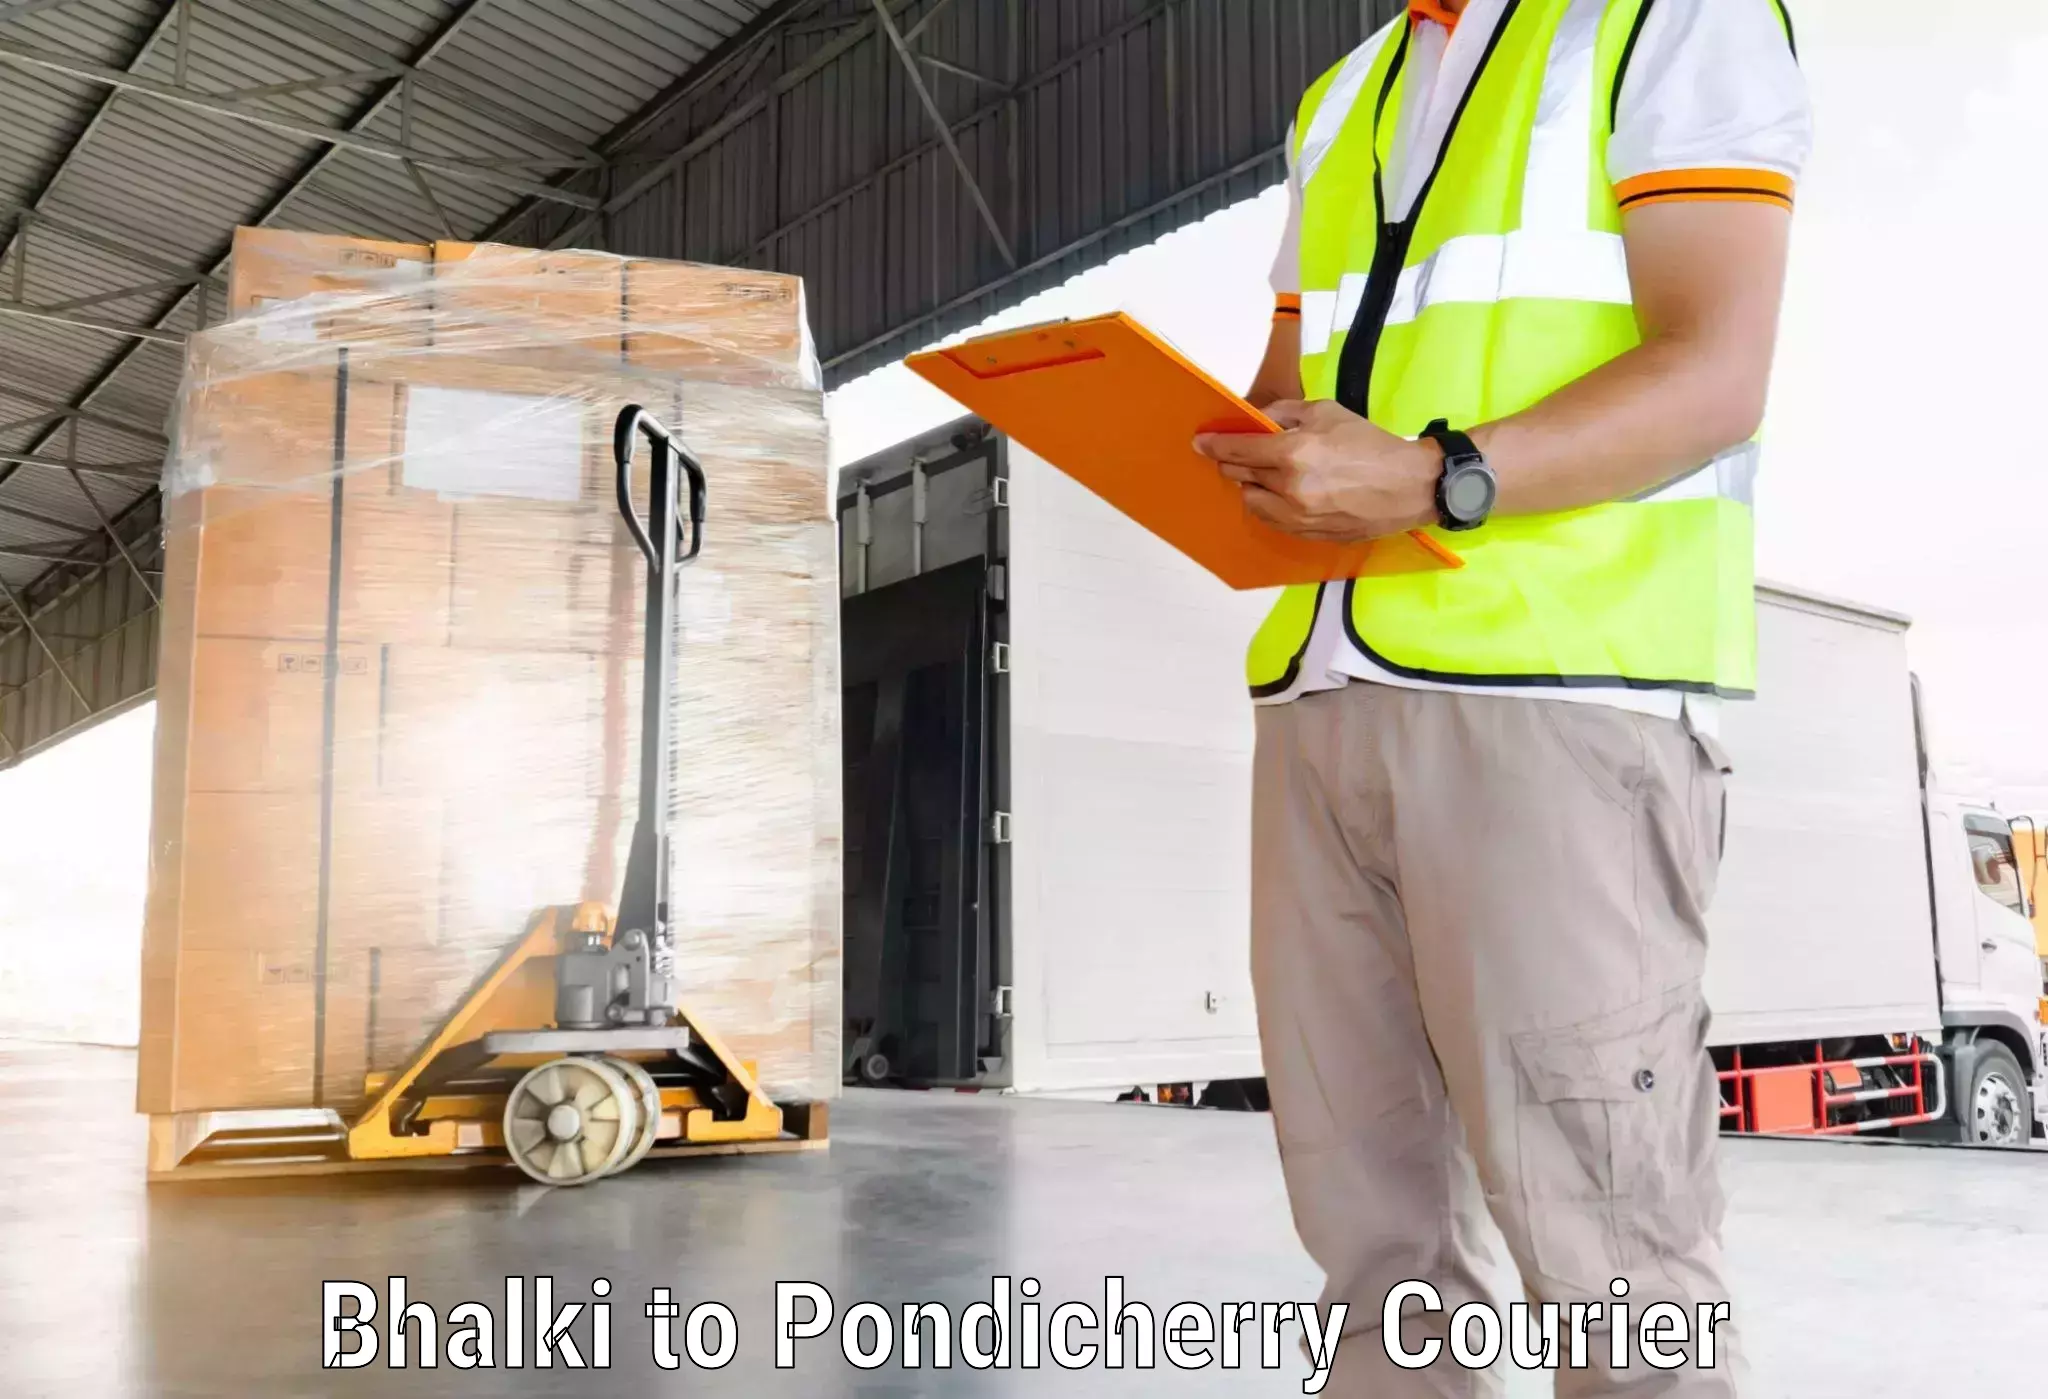 State-of-the-art courier technology Bhalki to Pondicherry